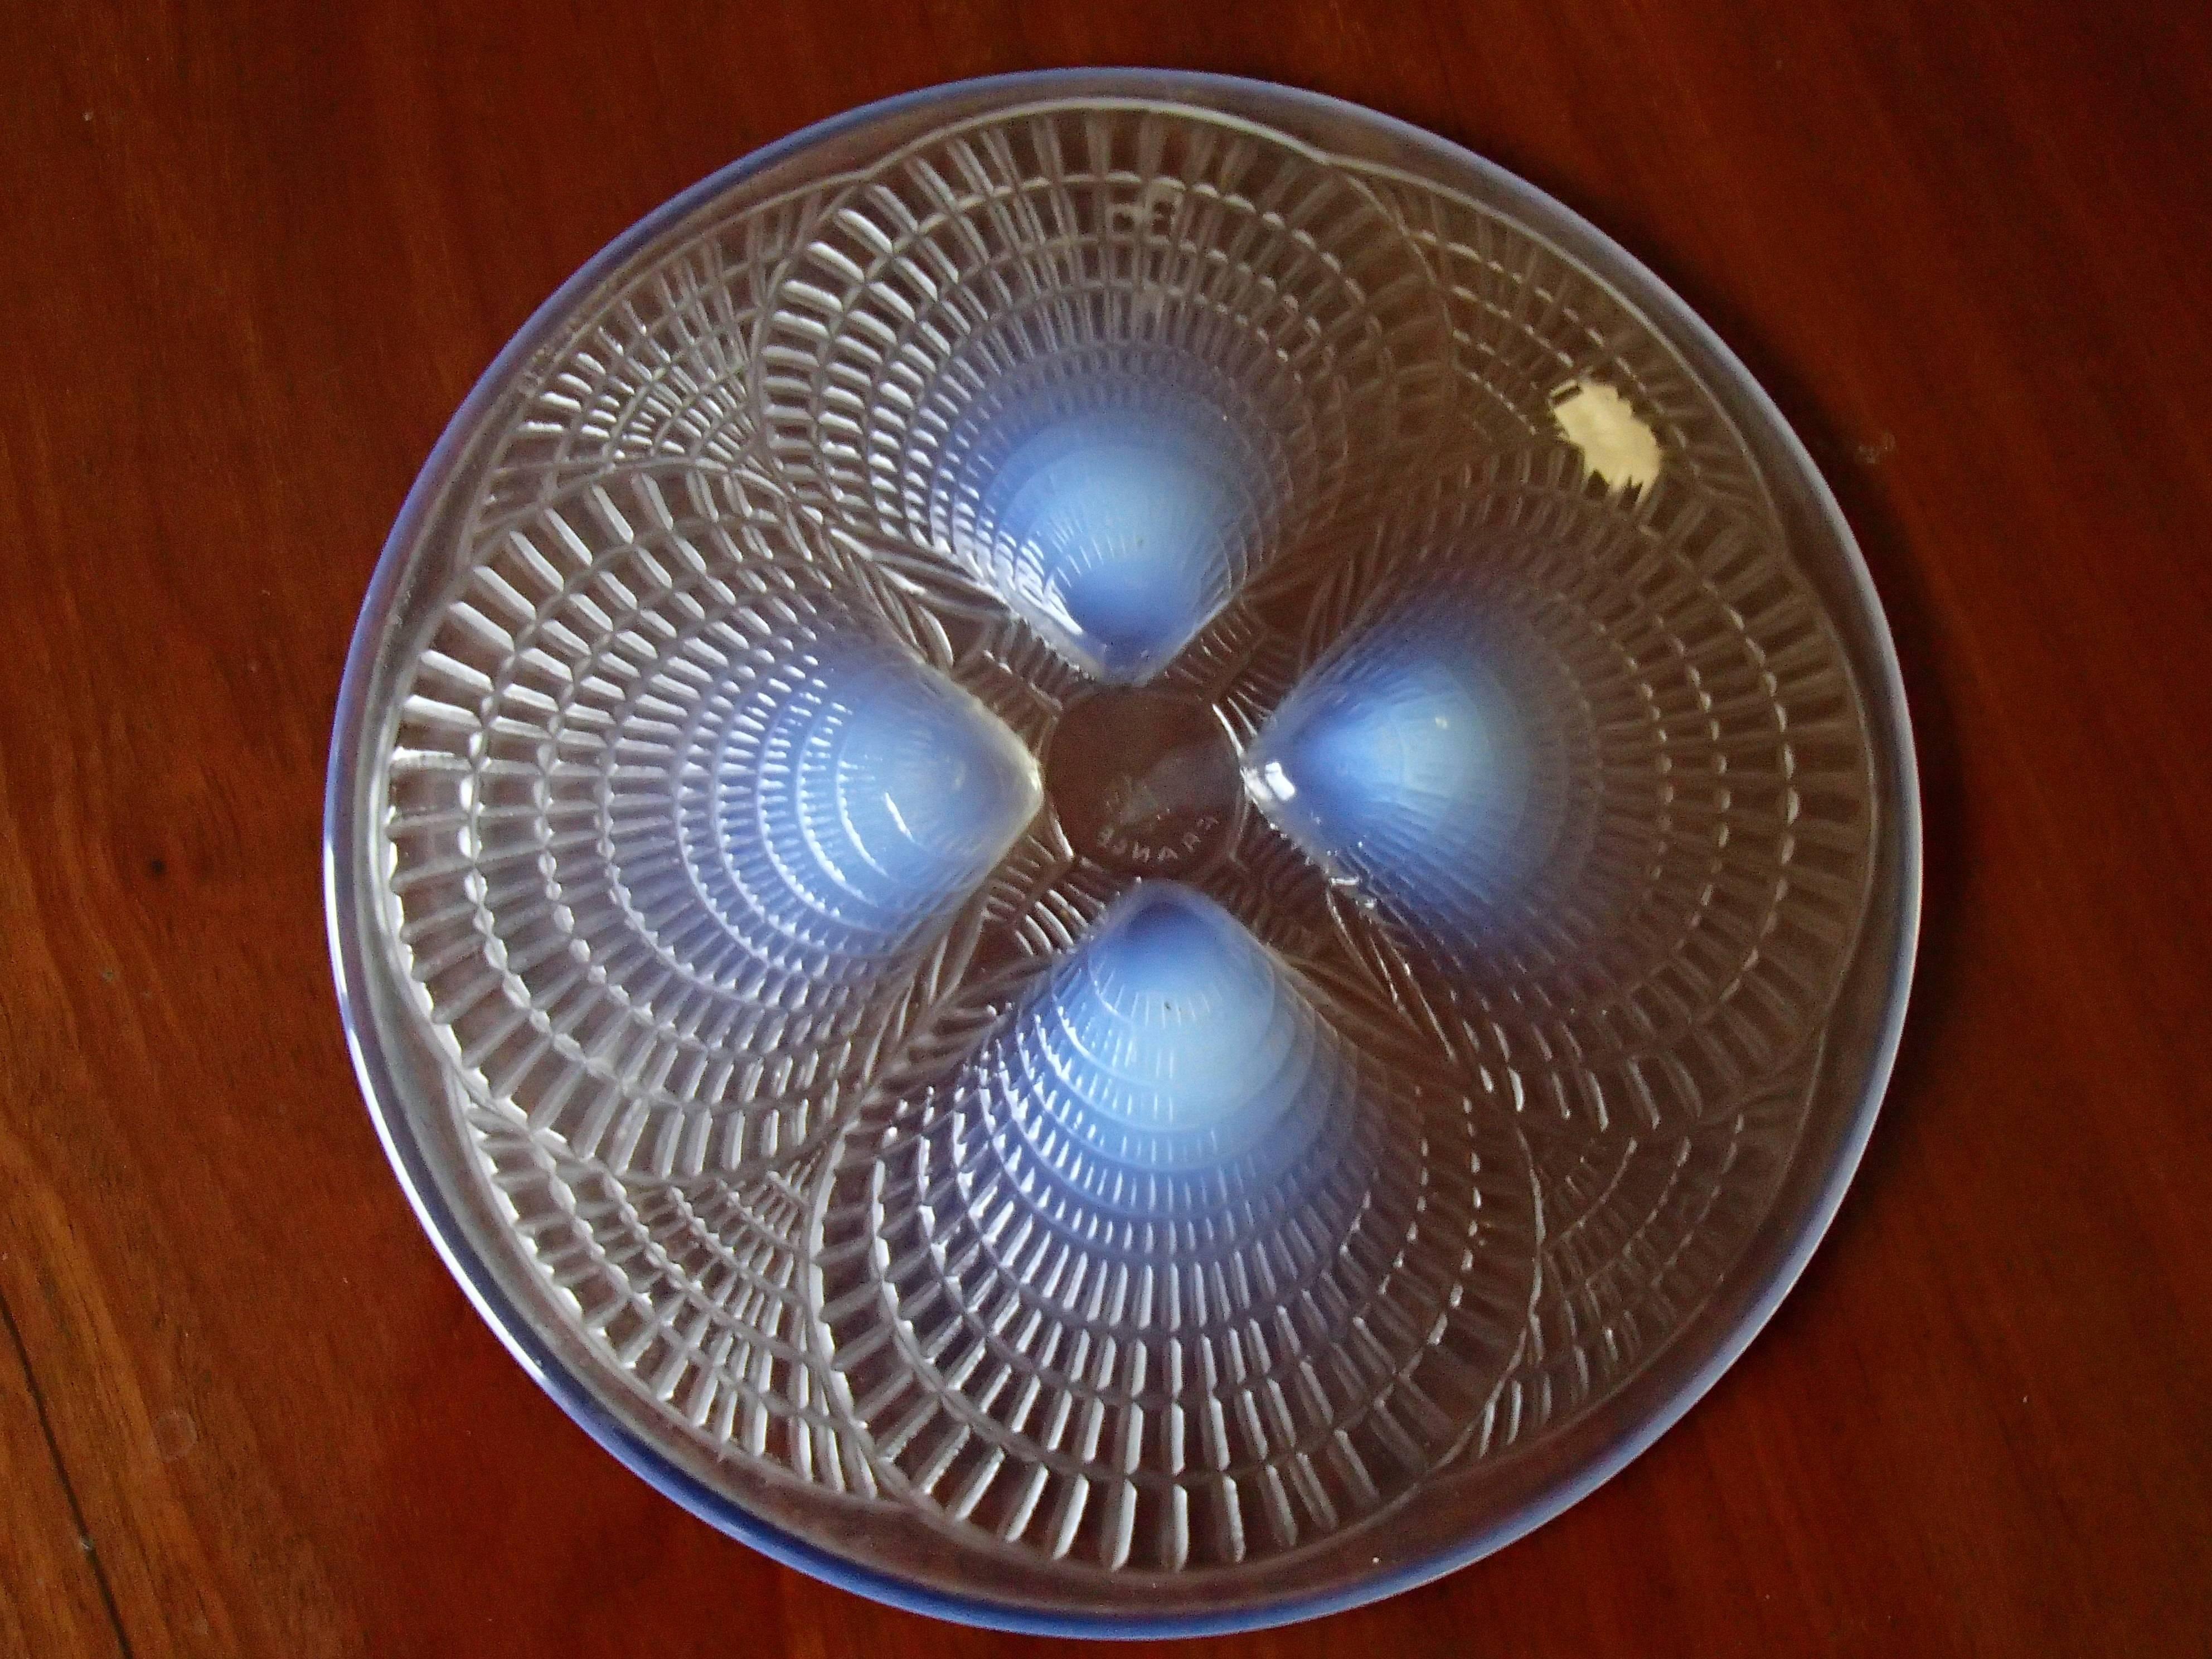 Lalique plate and bowl shells. The bowl is 13 x 5 cm and the plate 16 cm.